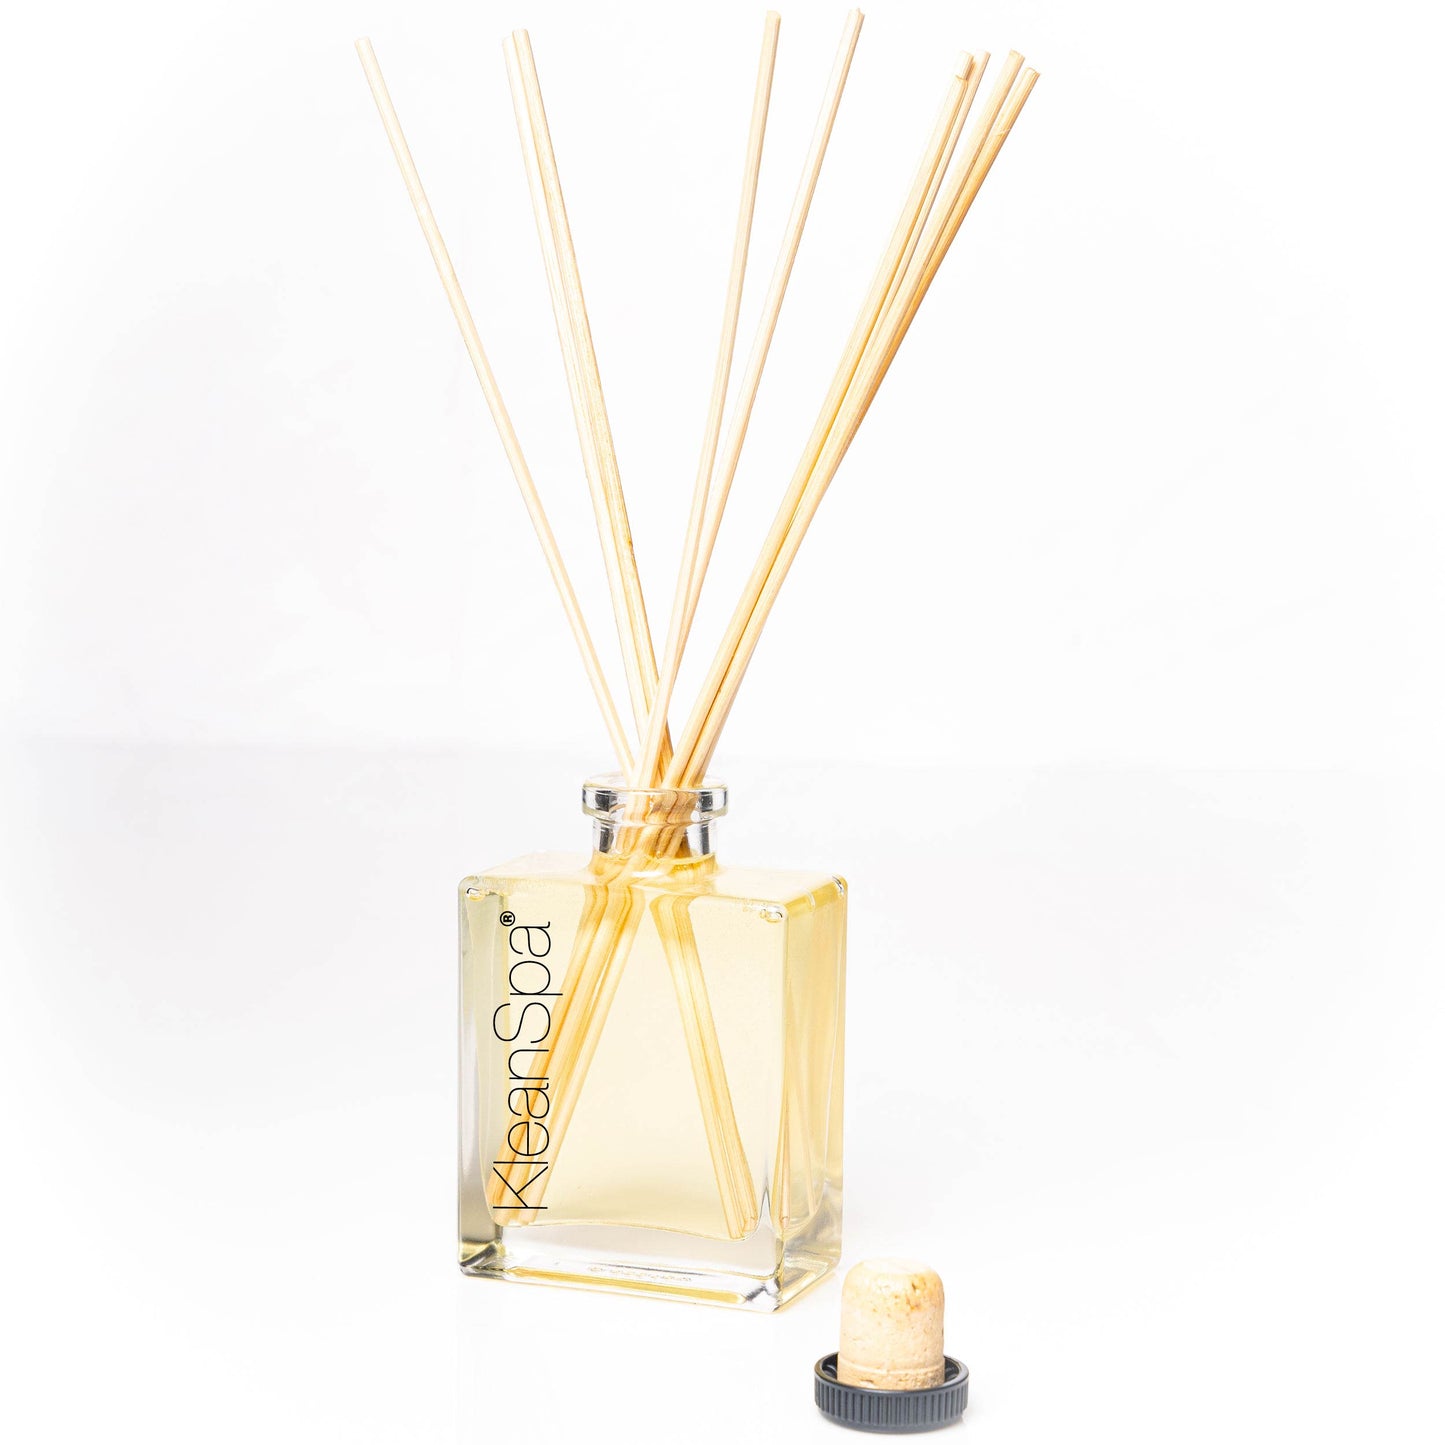 scented reed diffuser with reeds